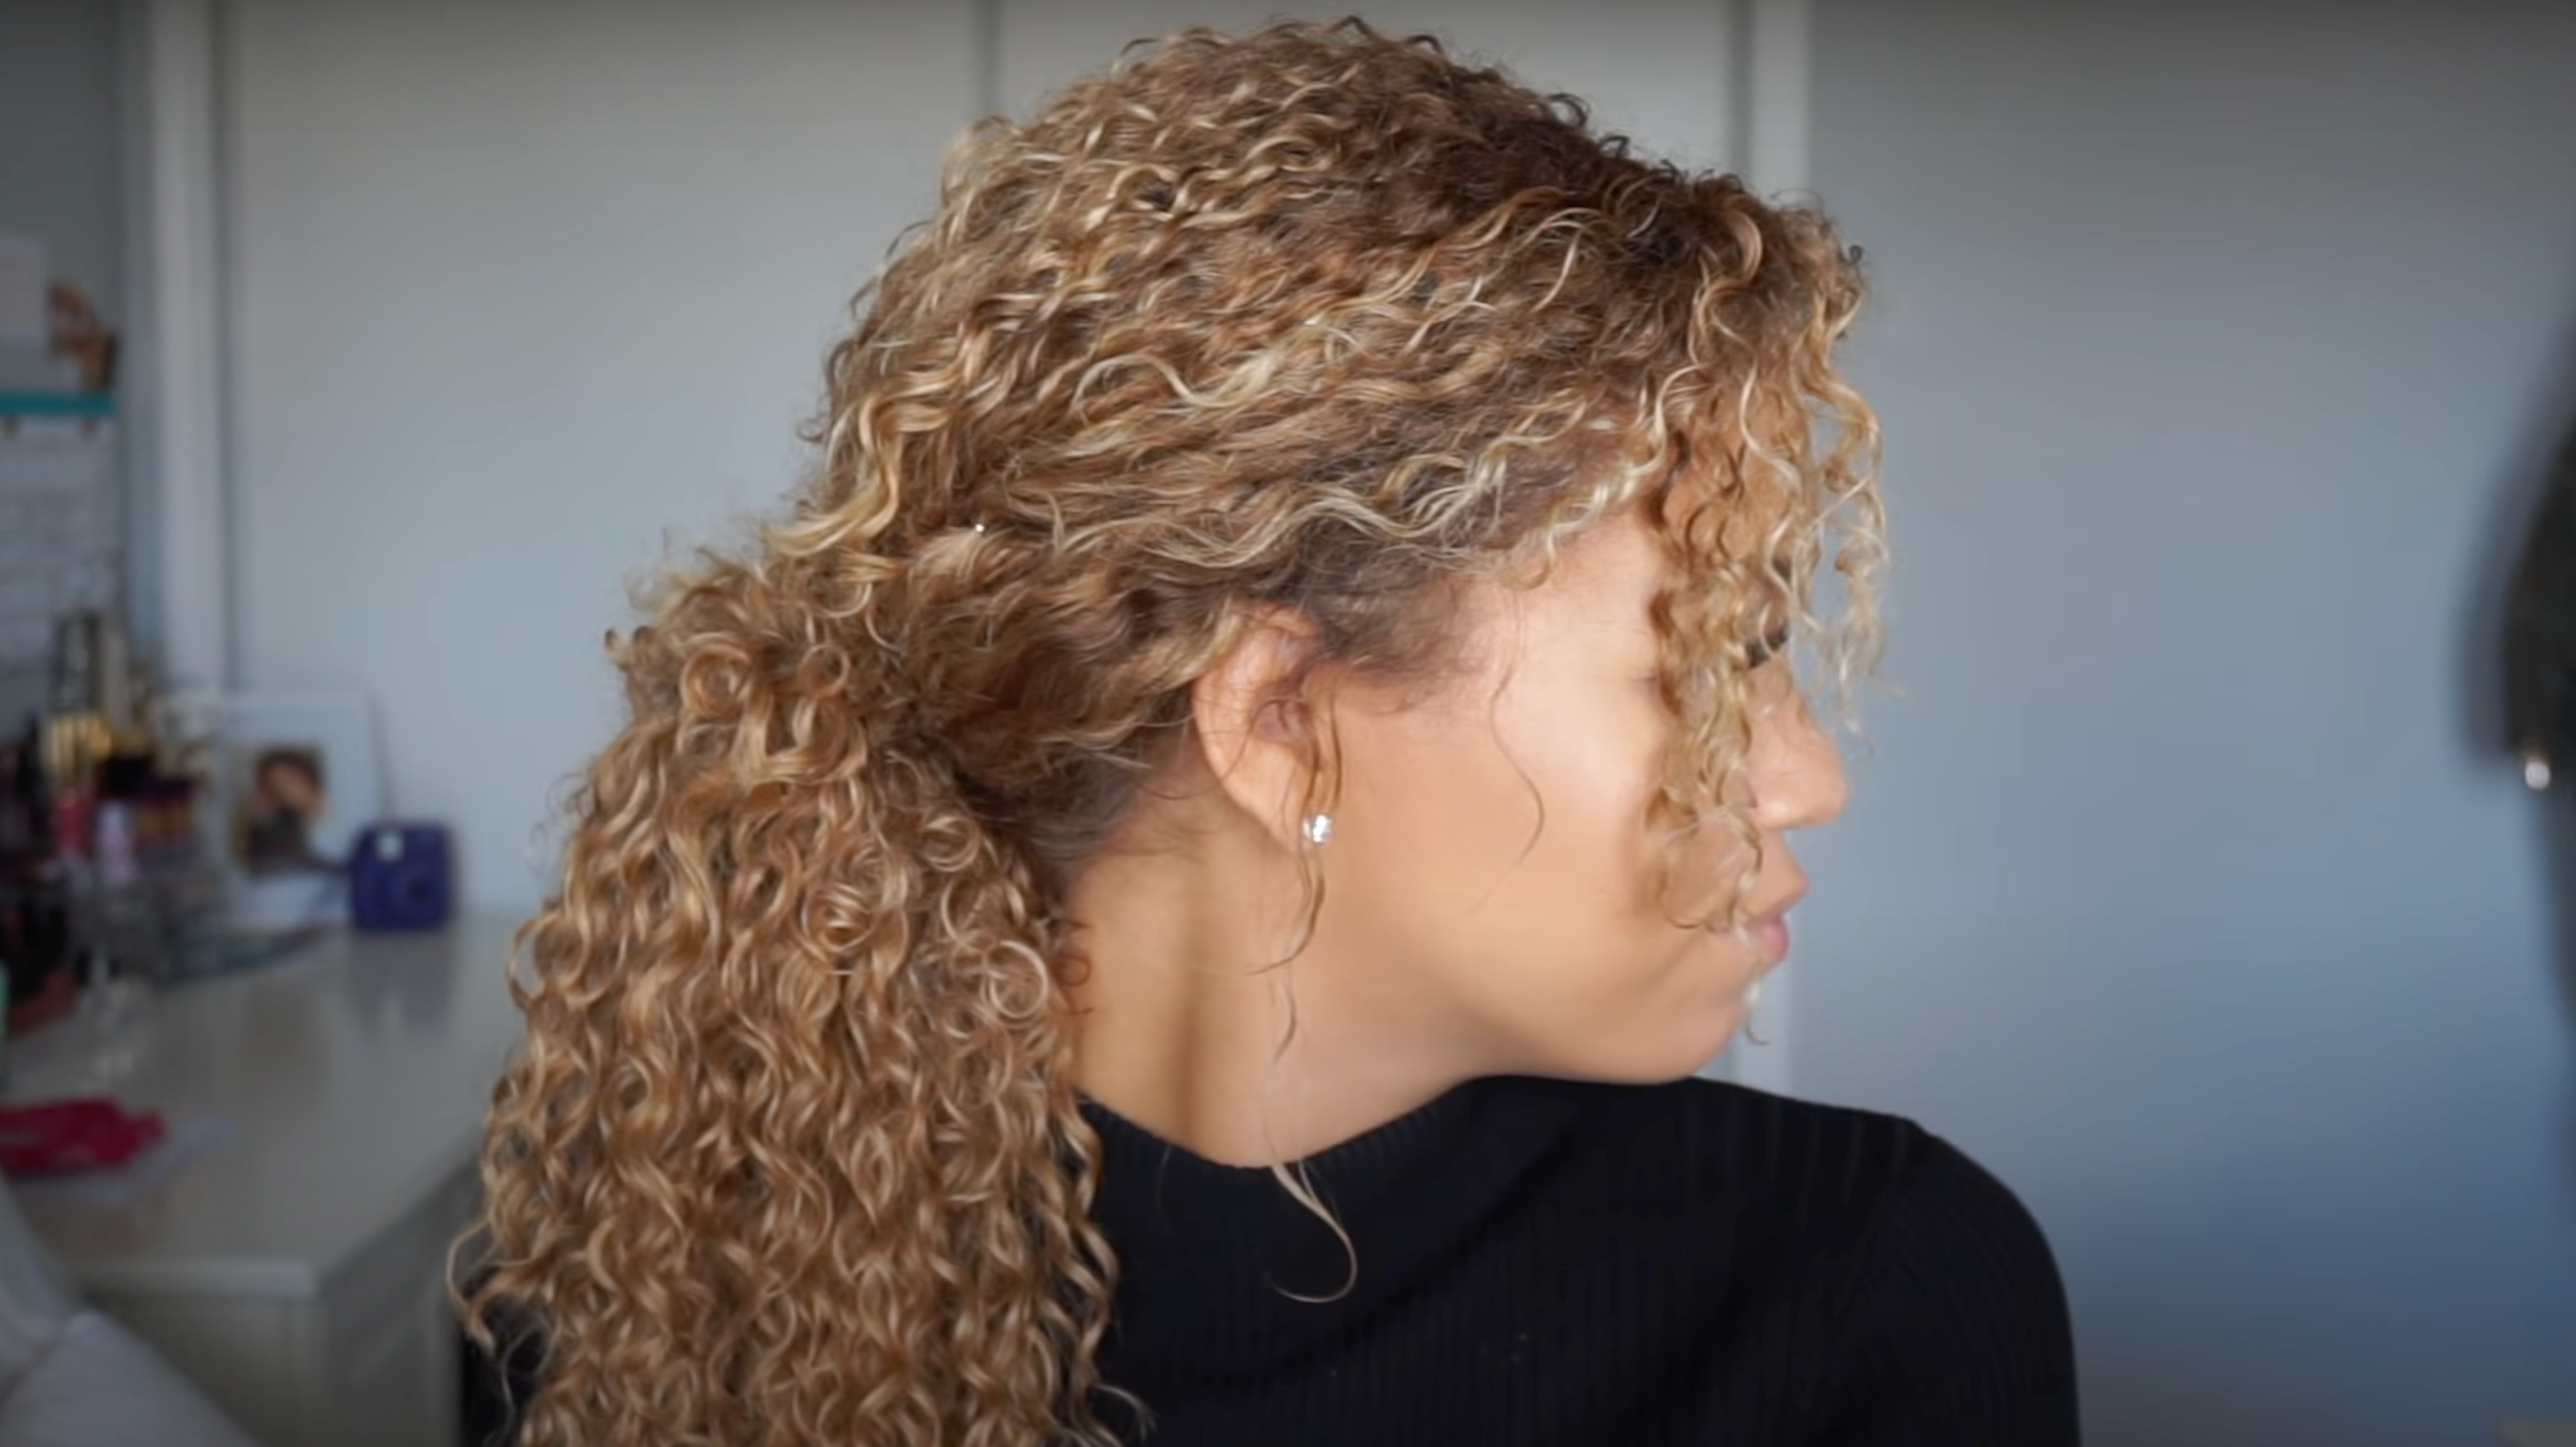 15 Chic Curly Hairstyles To Make You Look More Charming Curly hair styles,  Curly girl hairstyles, Curly bob hairstyles, haircuts for curly hair -  thirstymag.com